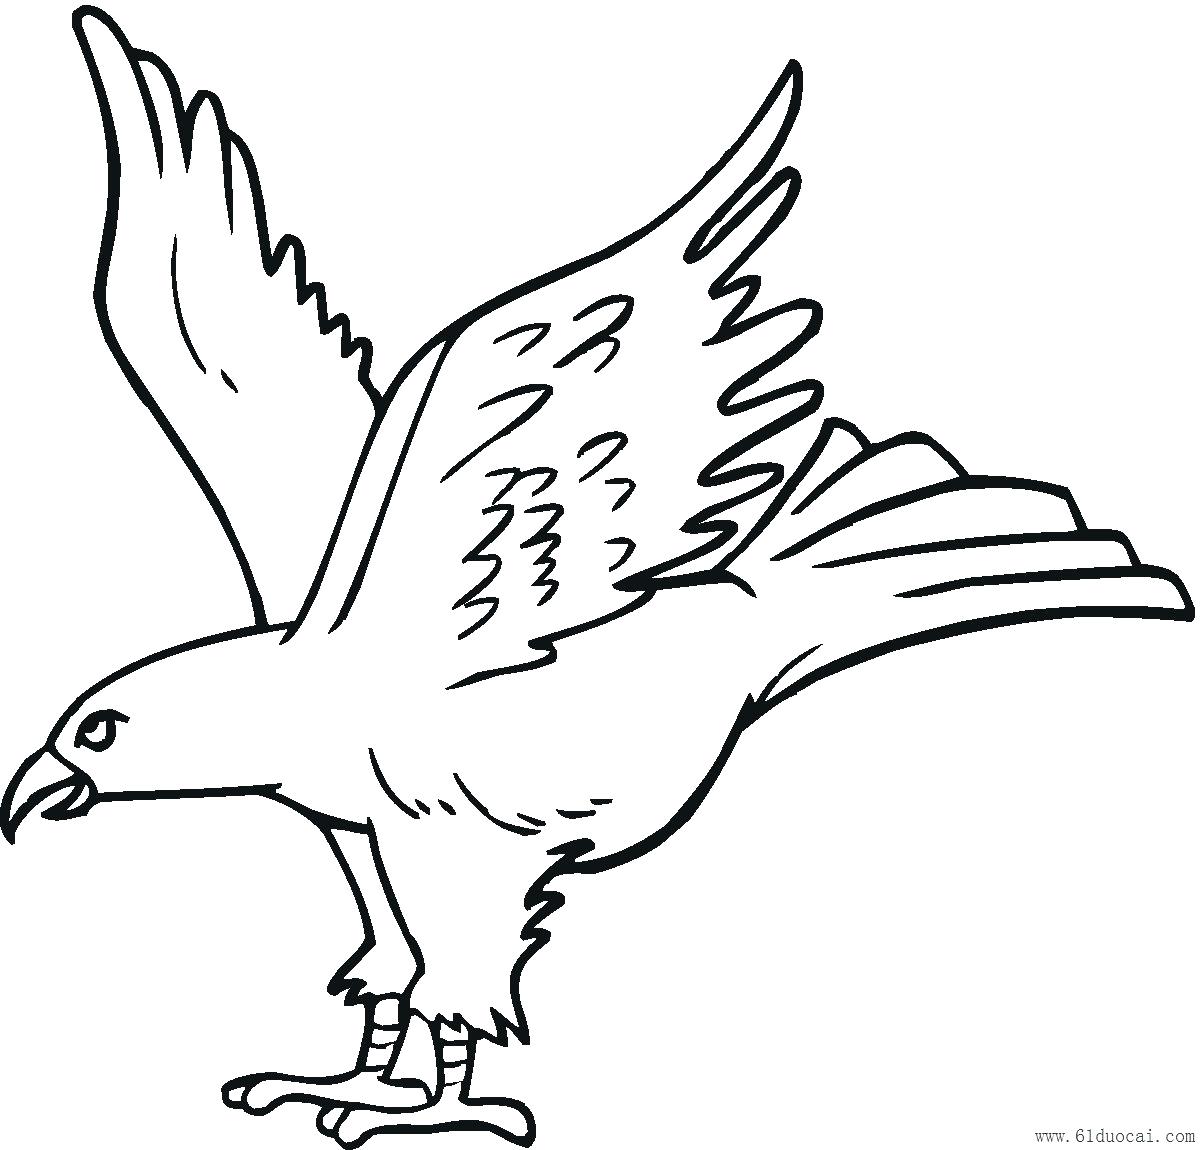 Bald Eagle Outline Drawing at GetDrawings | Free download